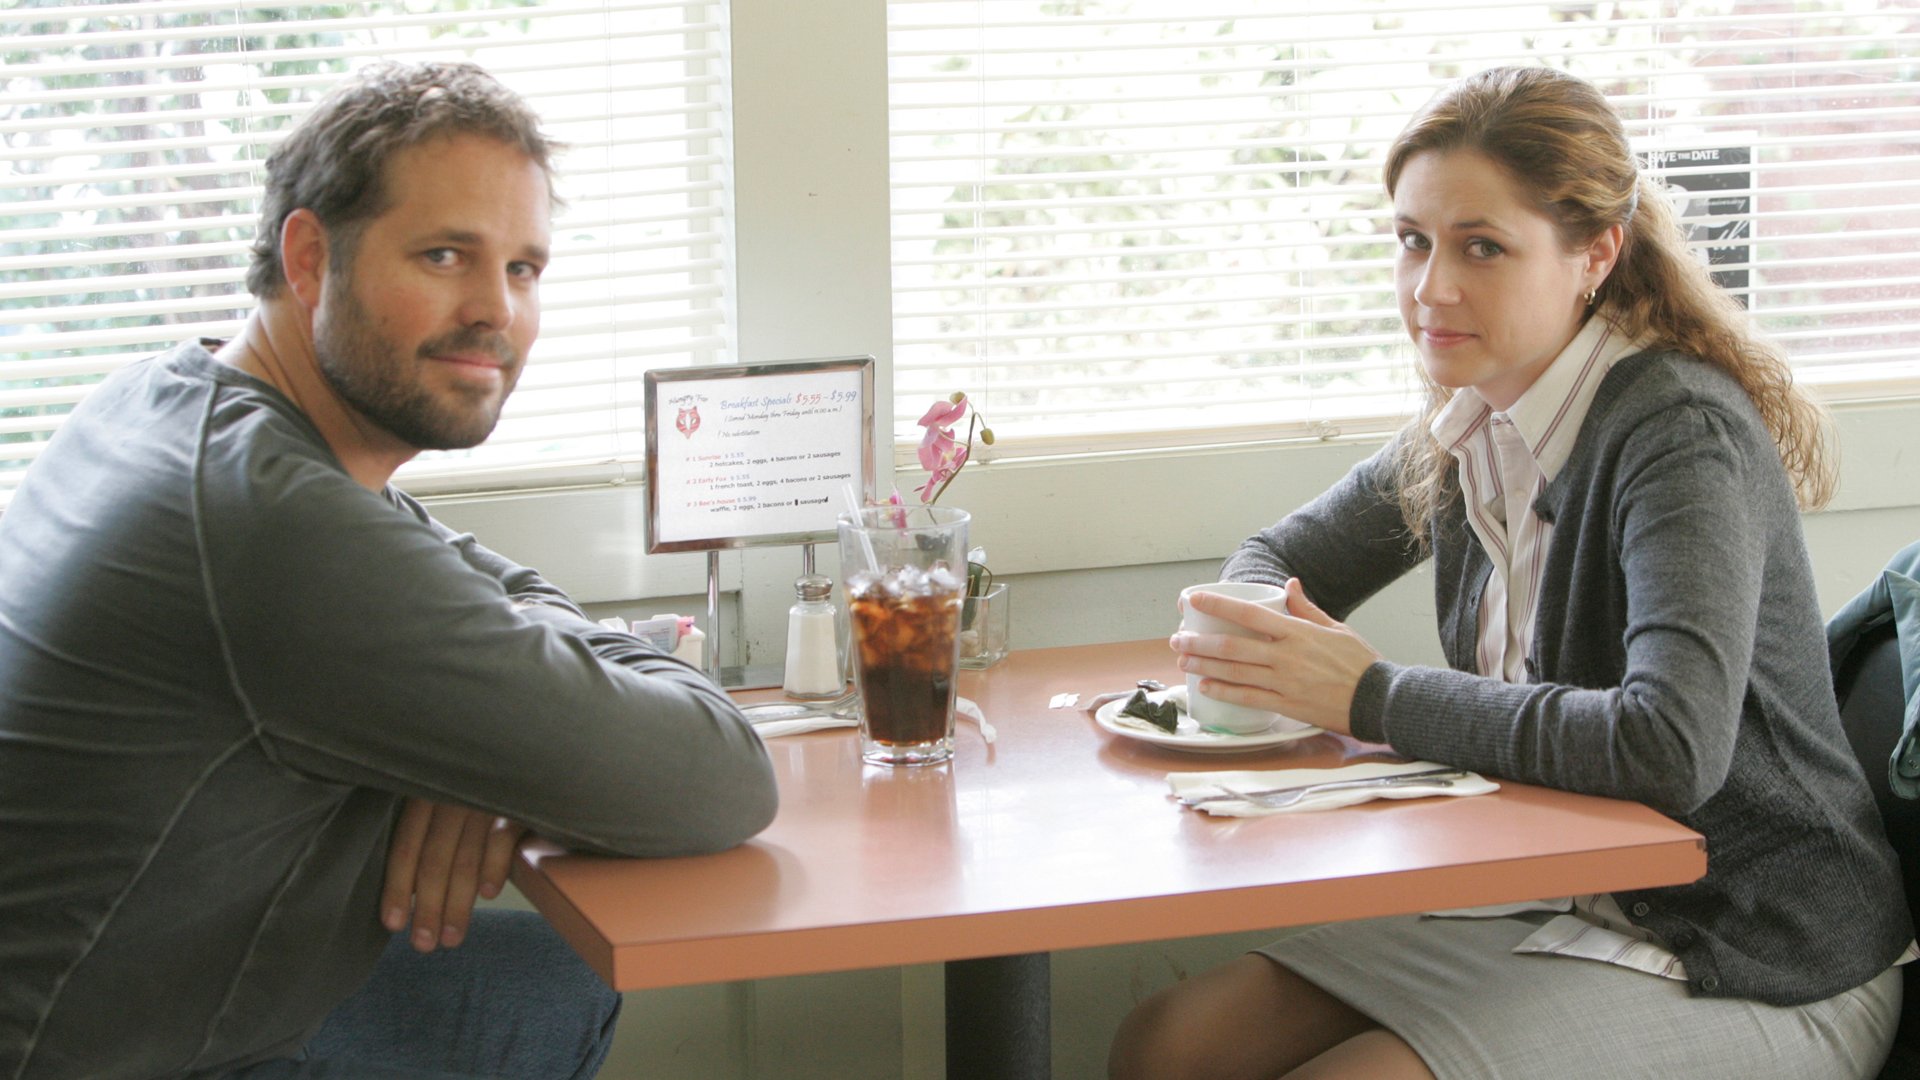 David Denman as Roy Anderson, Jenna Fischer as Pam Beesly on 'The Office'